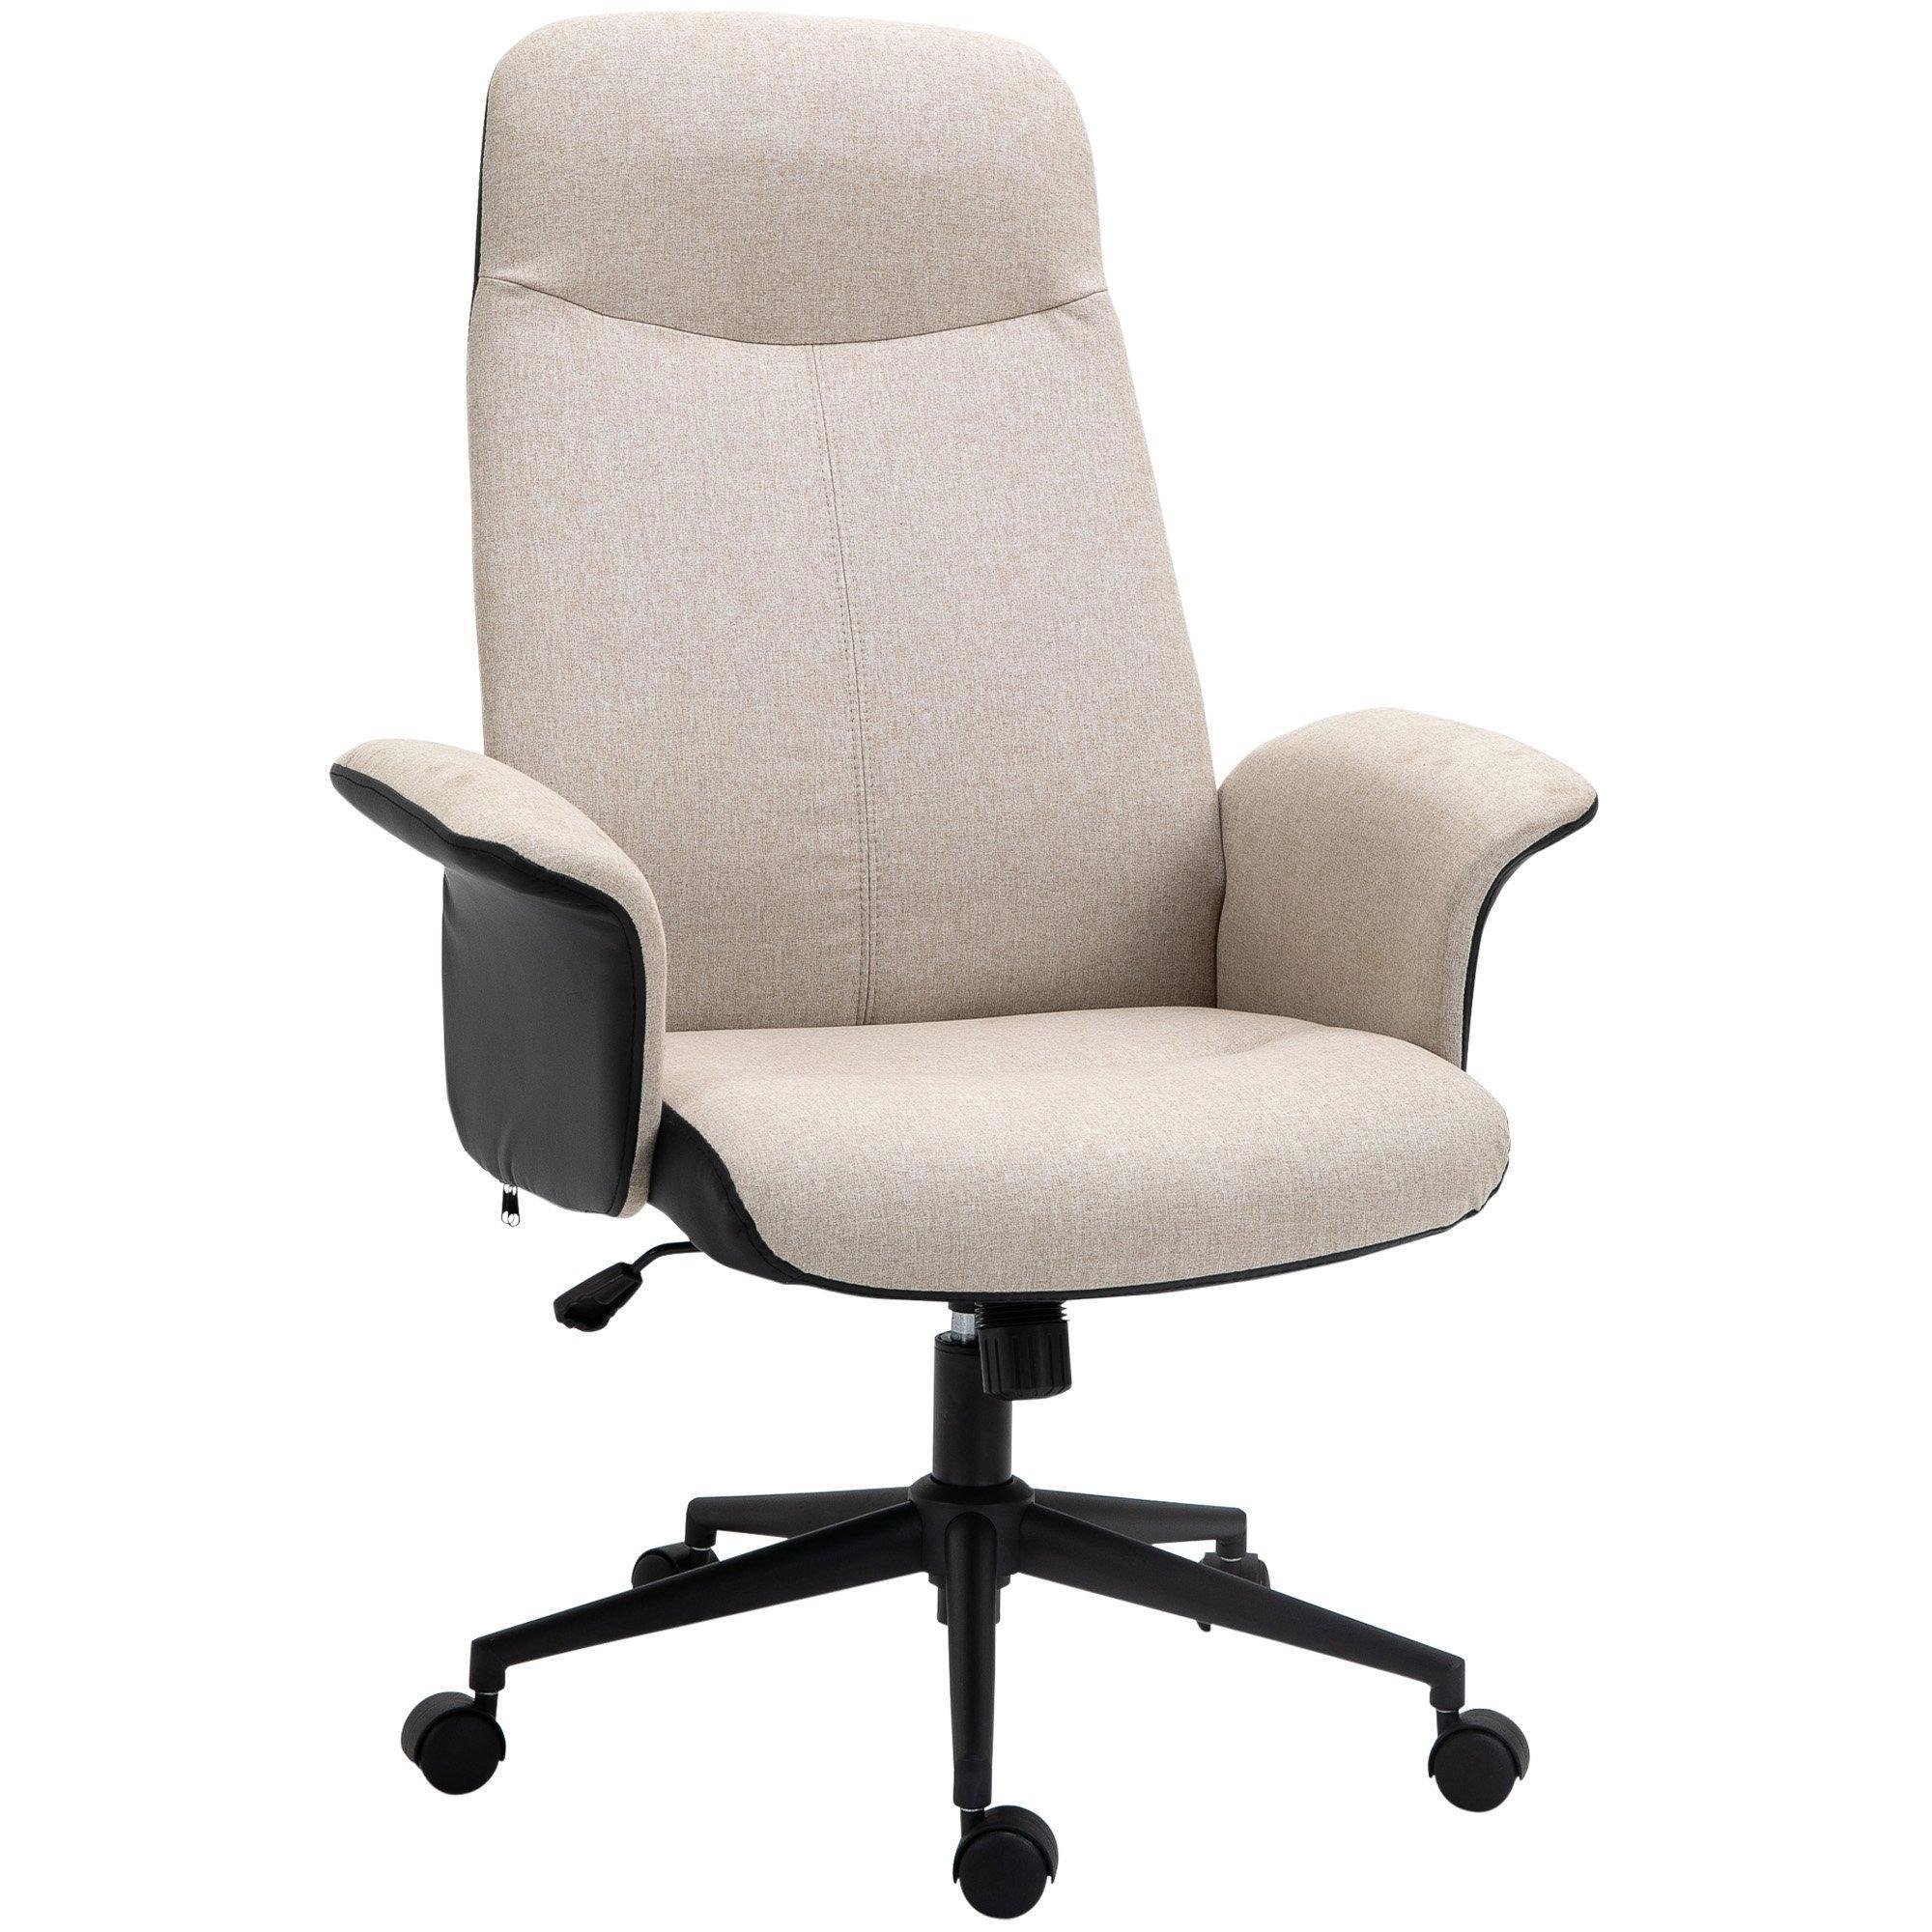 Home Office Chair Height Adjustable Computer Chair with Armrests - image 1